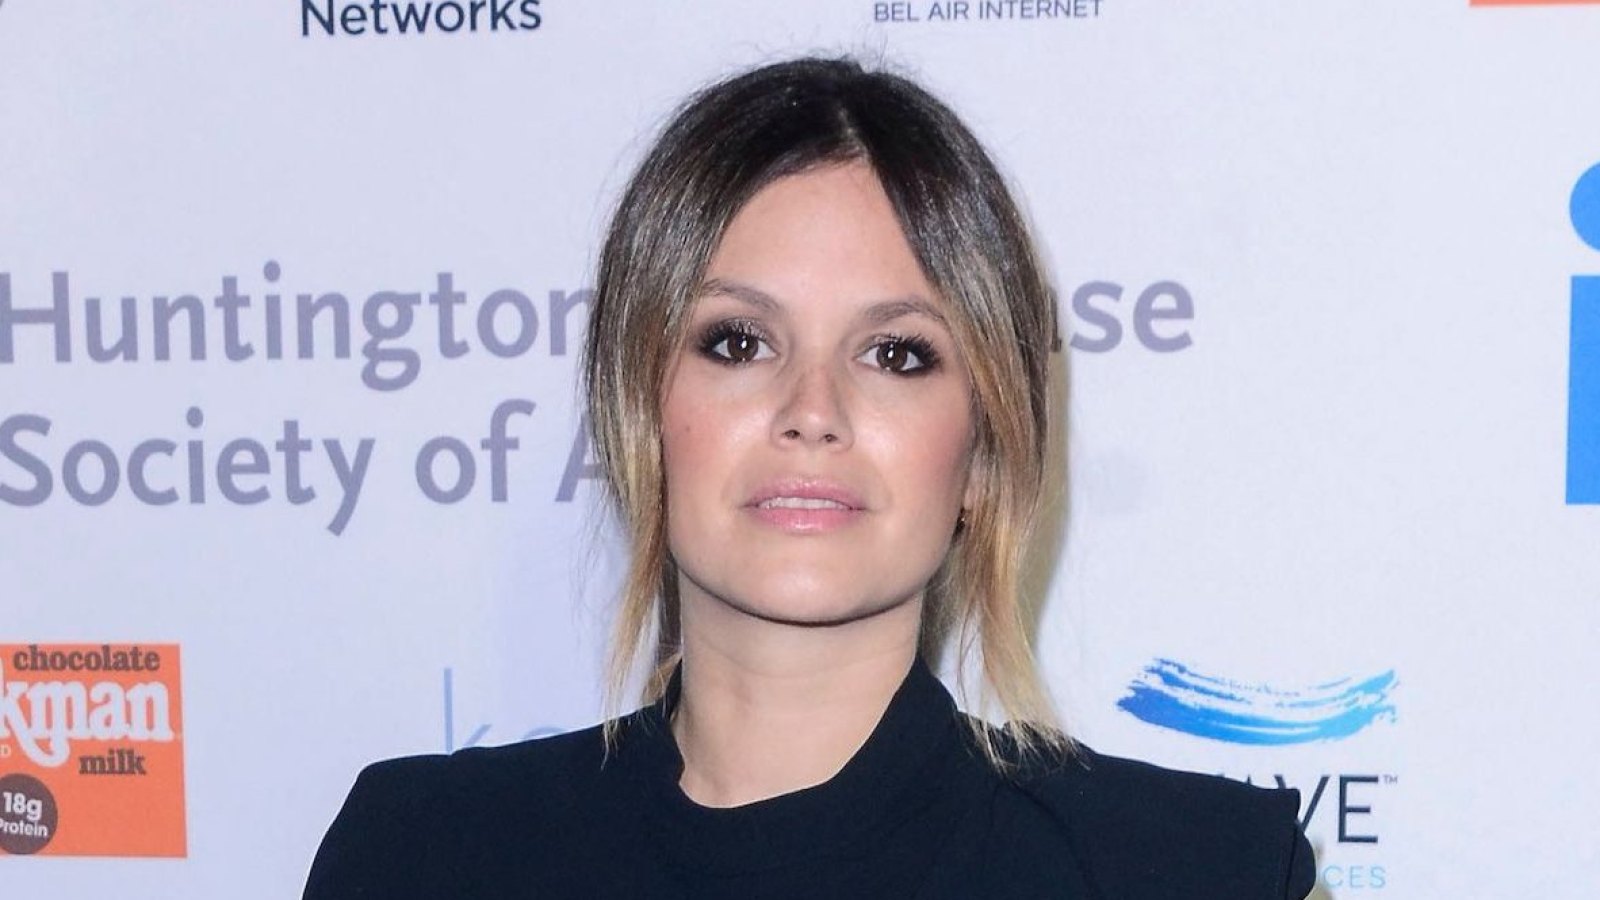 Rachel Bilson Clarifies Comment About Not Having an Orgasm Until Age 38, Says She Isn't 'Giving a Trophy' to Any Exes